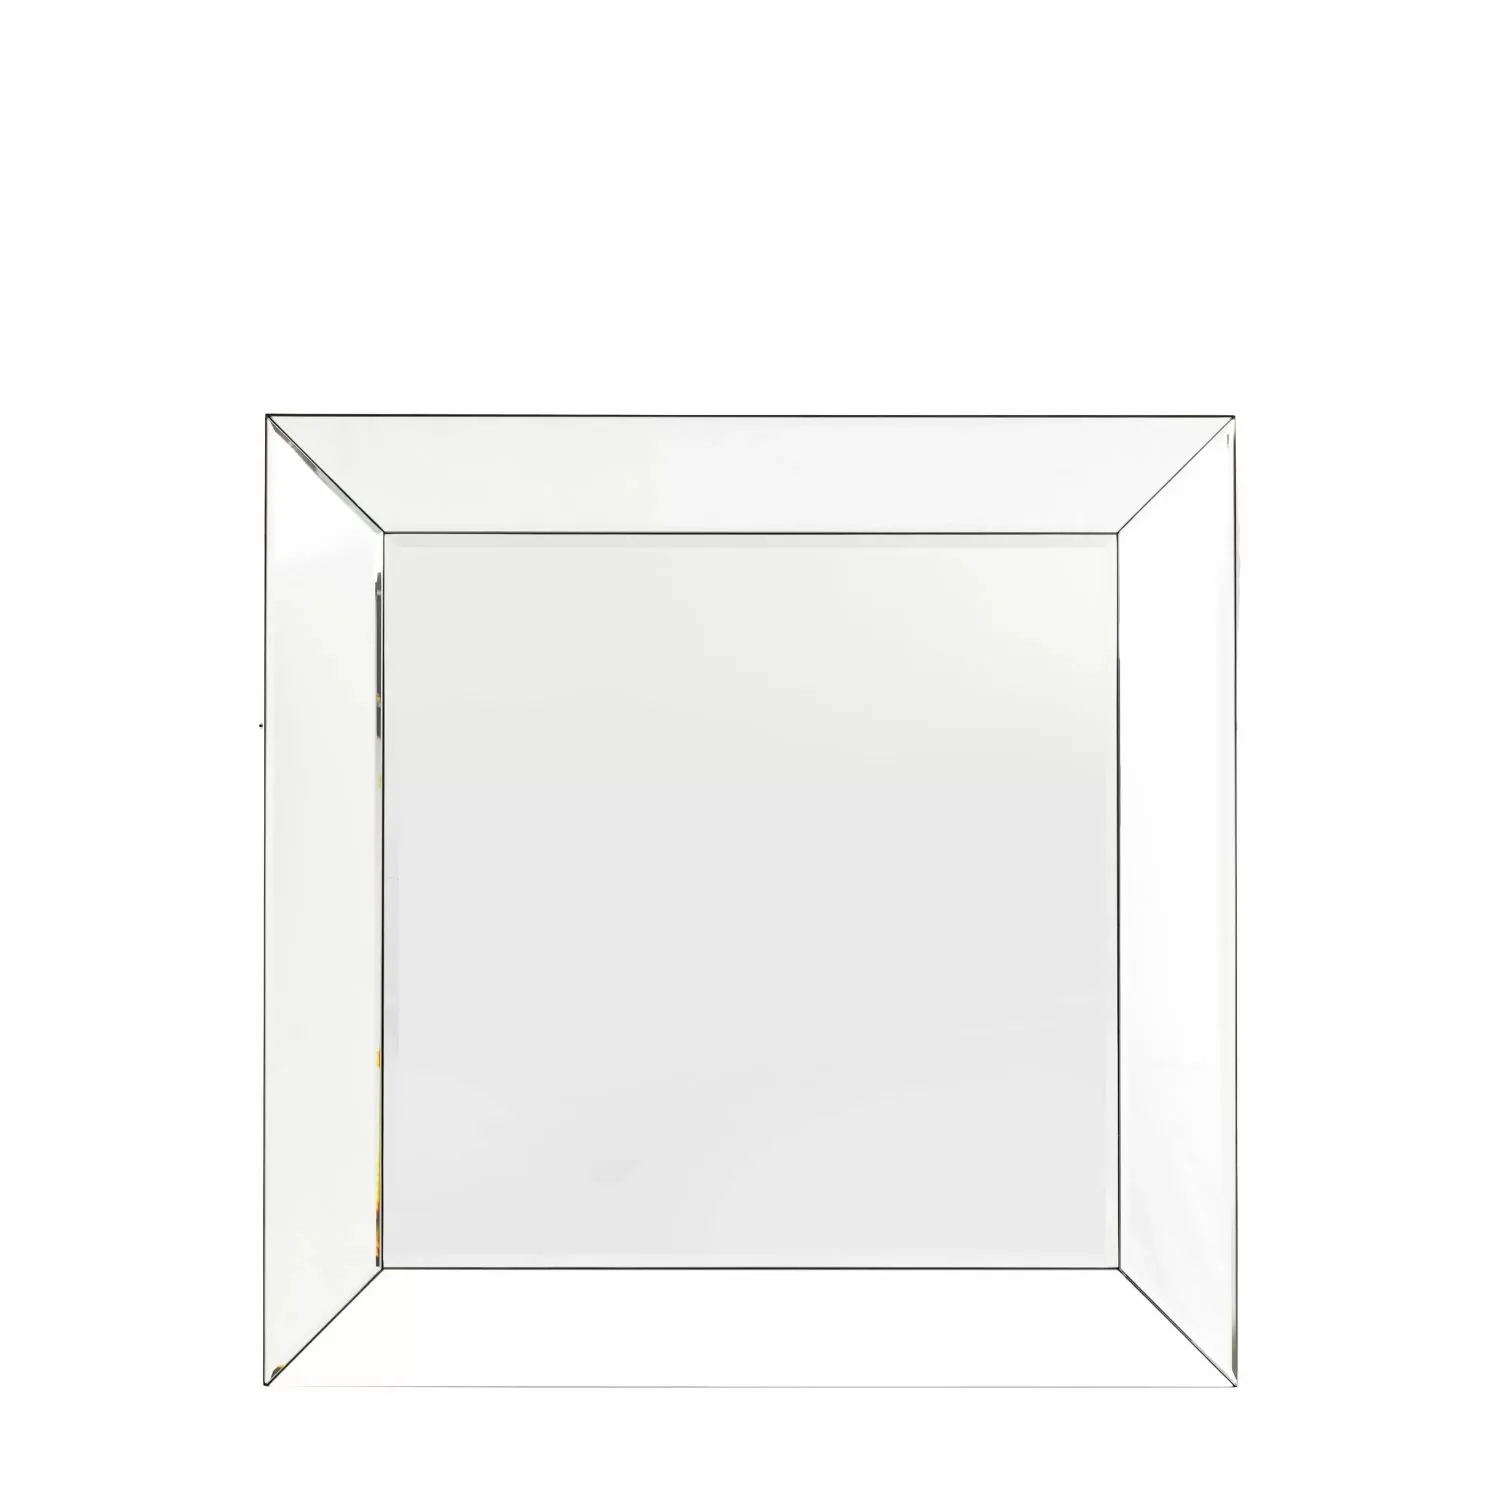 Bevelled Edge Square Silver Wall Mirror